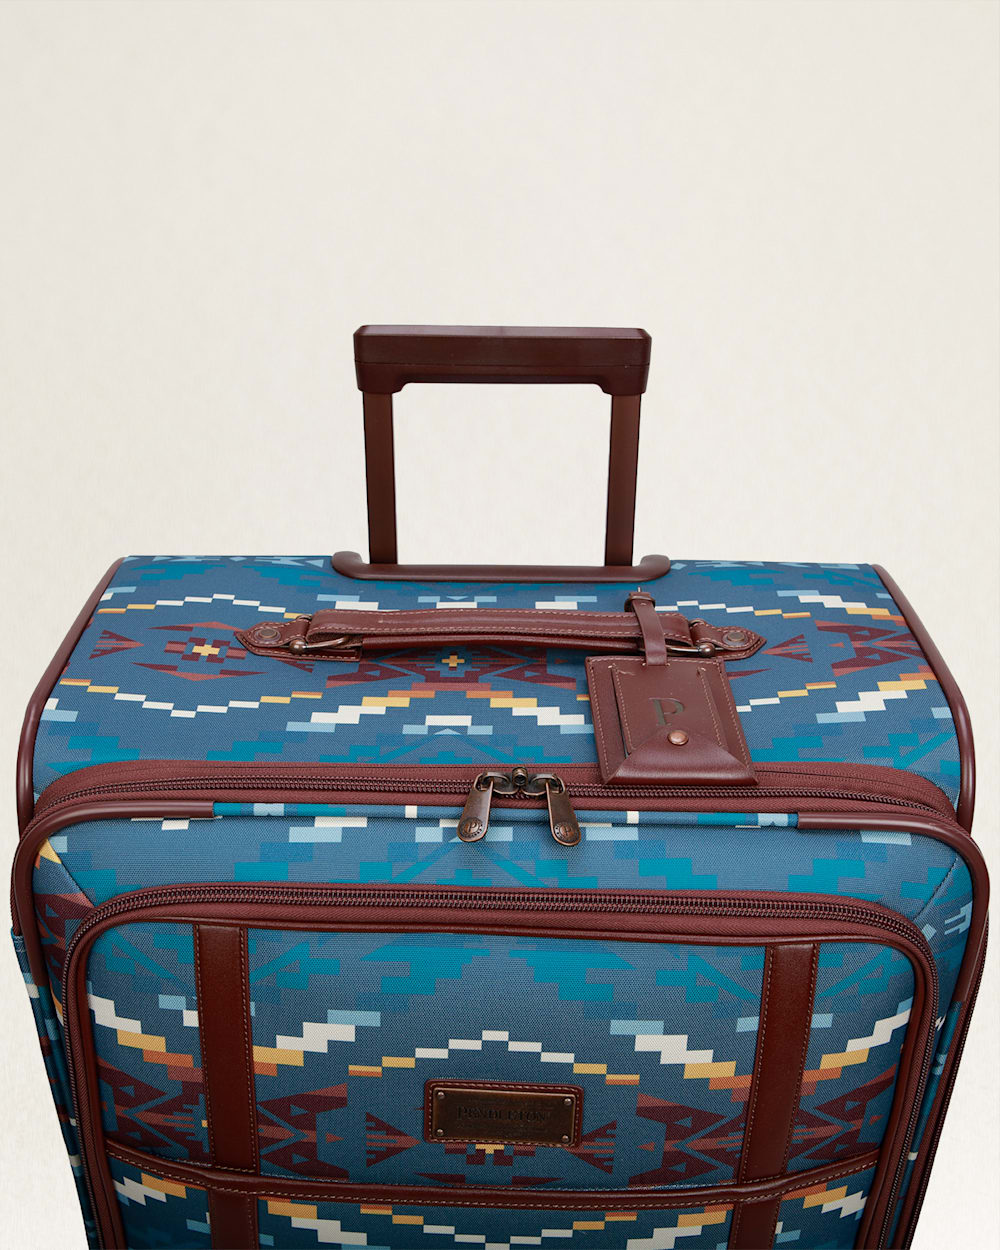 ALTERNATE VIEW OF CARICO LAKE 28" SOFTSIDE SPINNER LUGGAGE IN BLUE image number 7